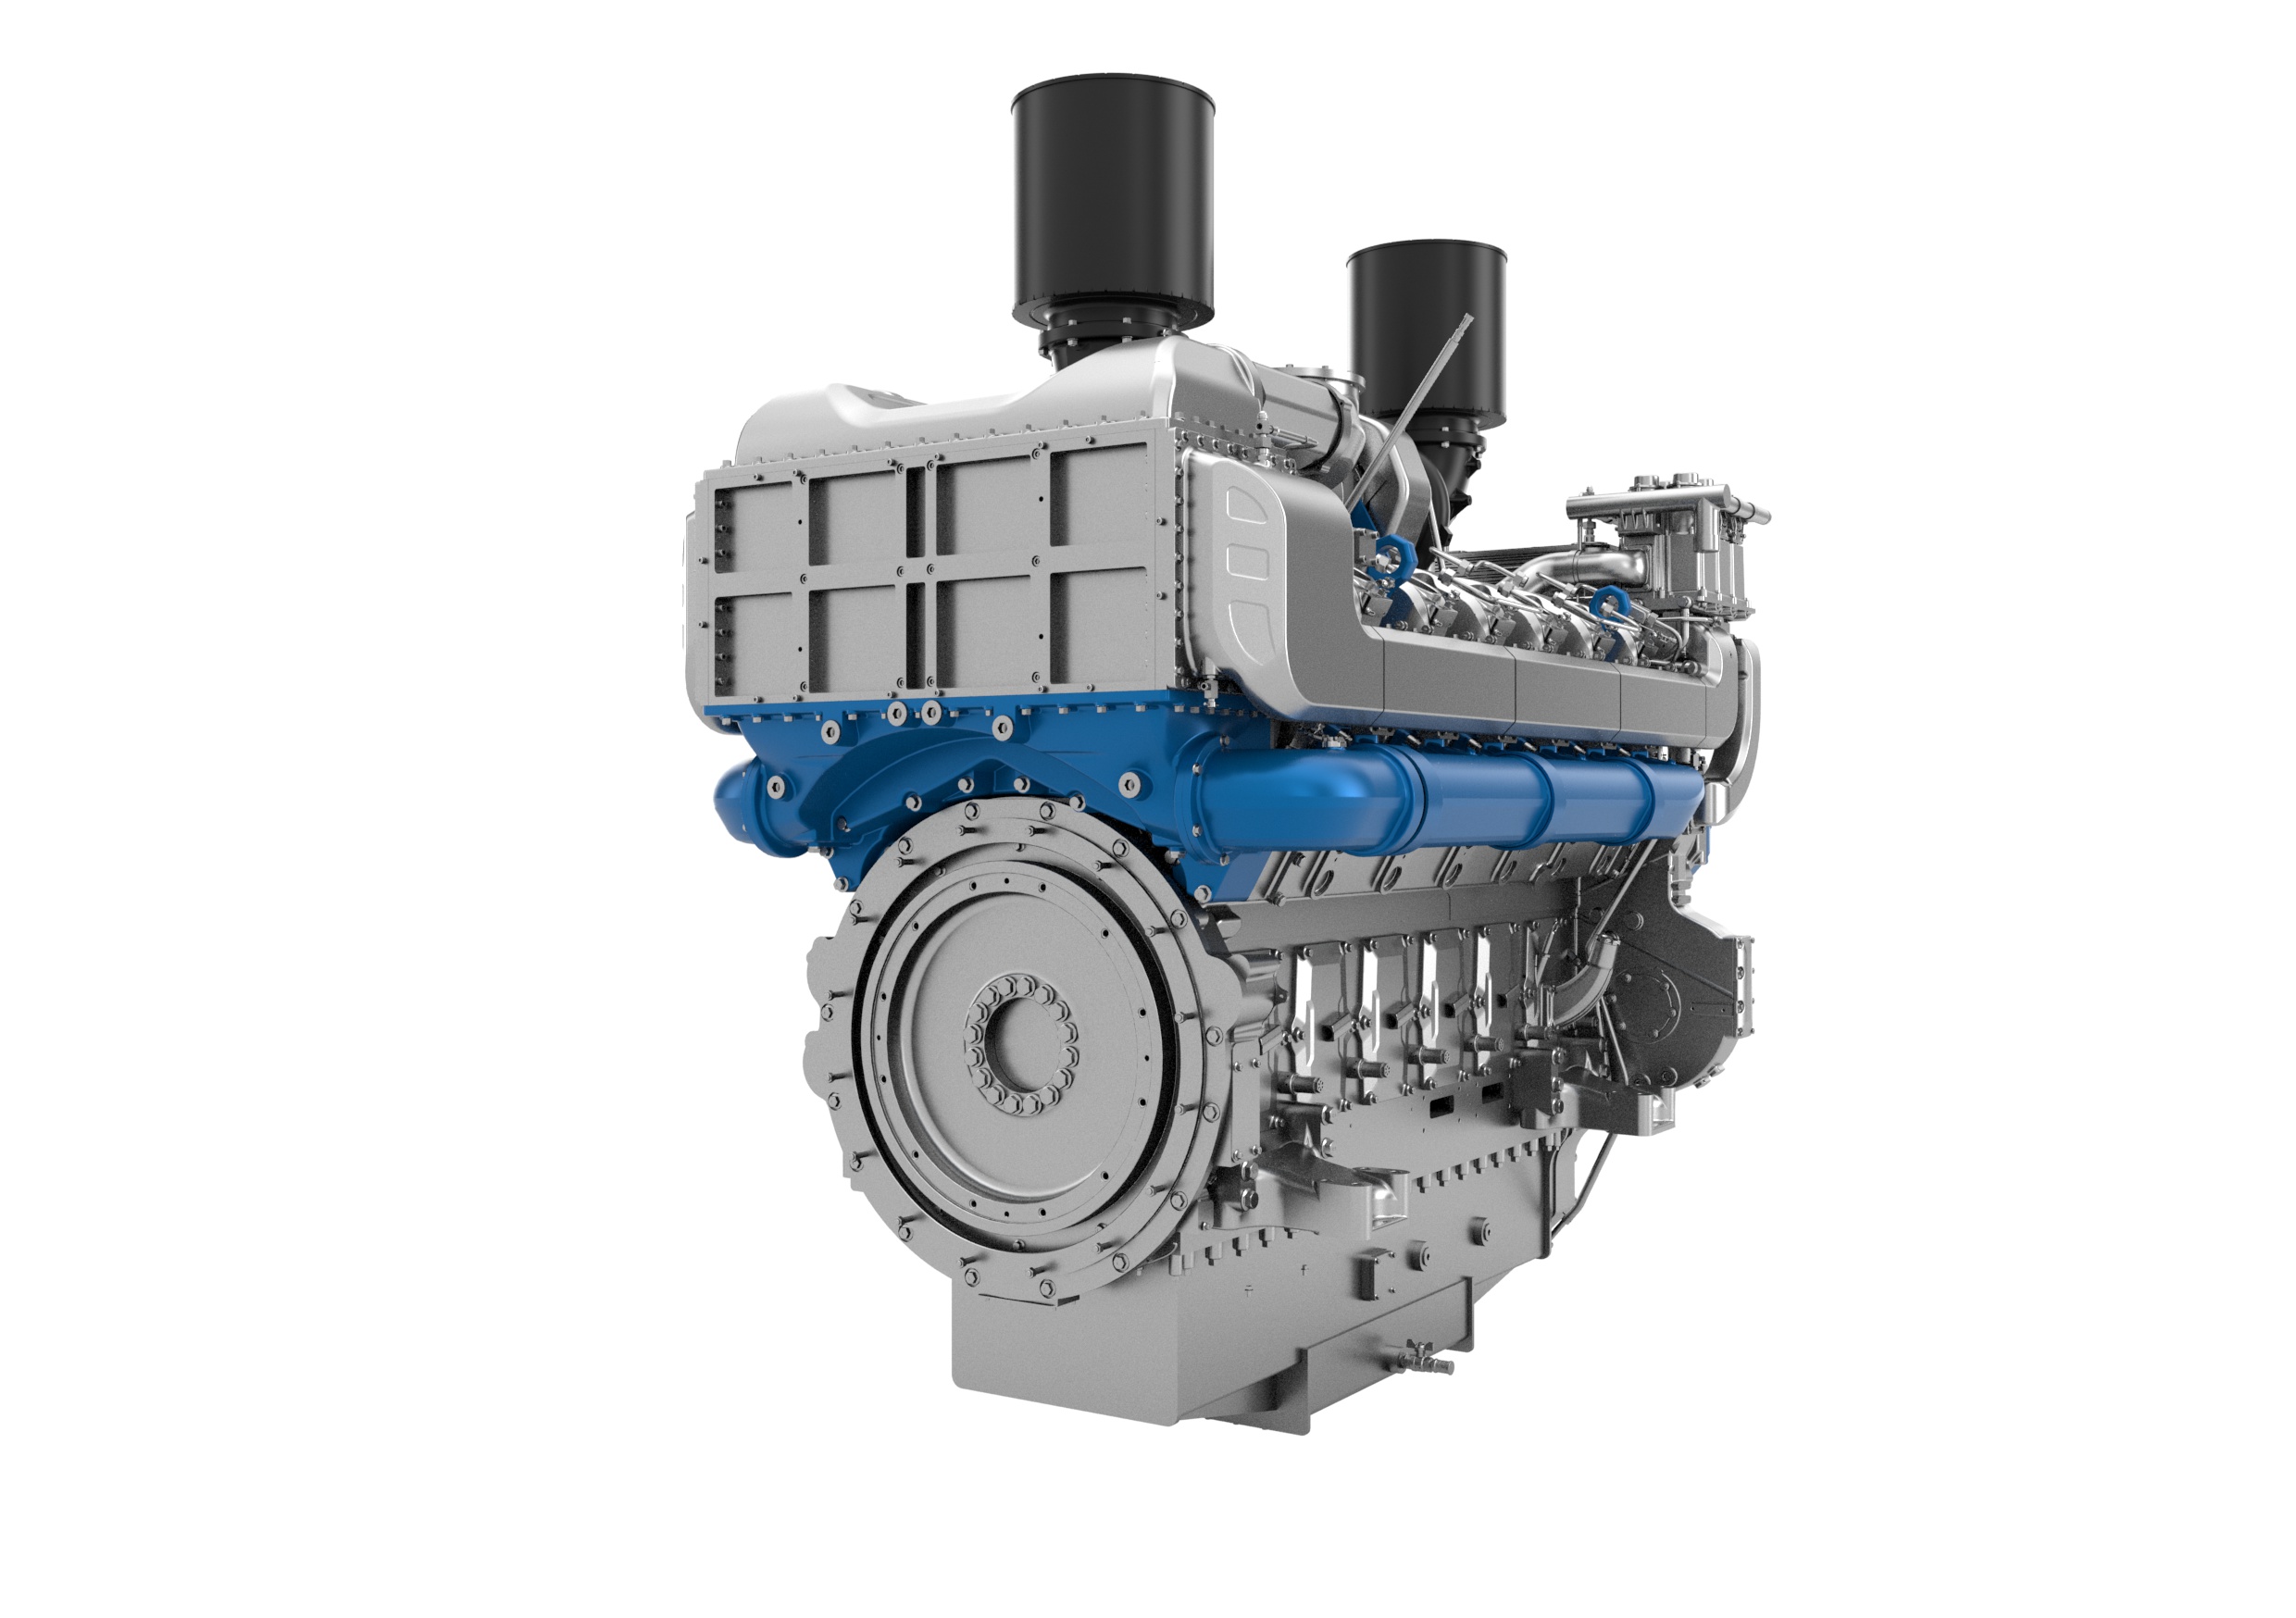 Baudouin has evolved towards greener power generation thanks to the new Baudouin gas engine range available now.